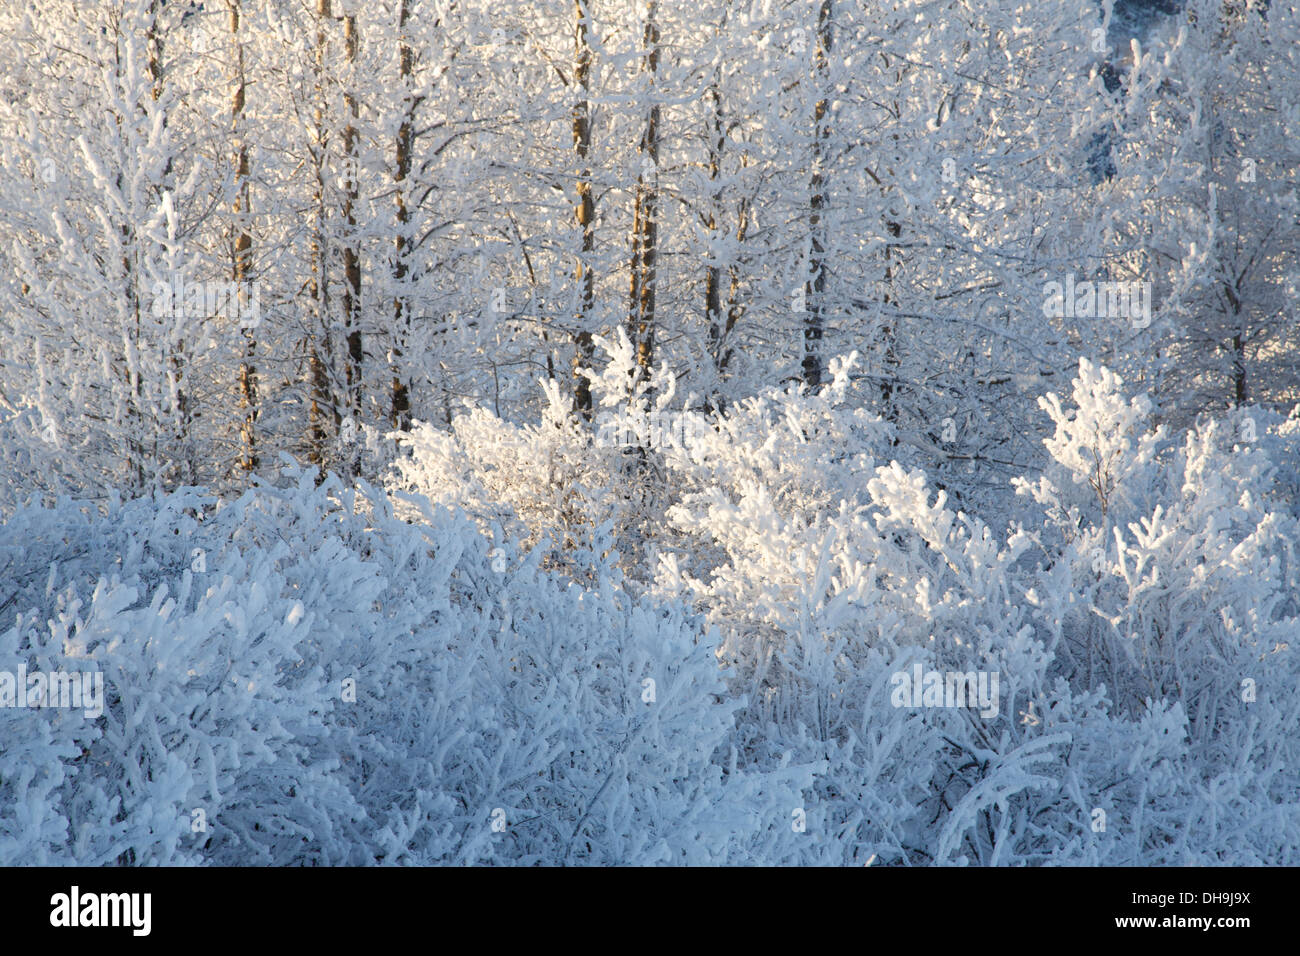 Winter in the Chugach National Forest, Alaska. Stock Photo